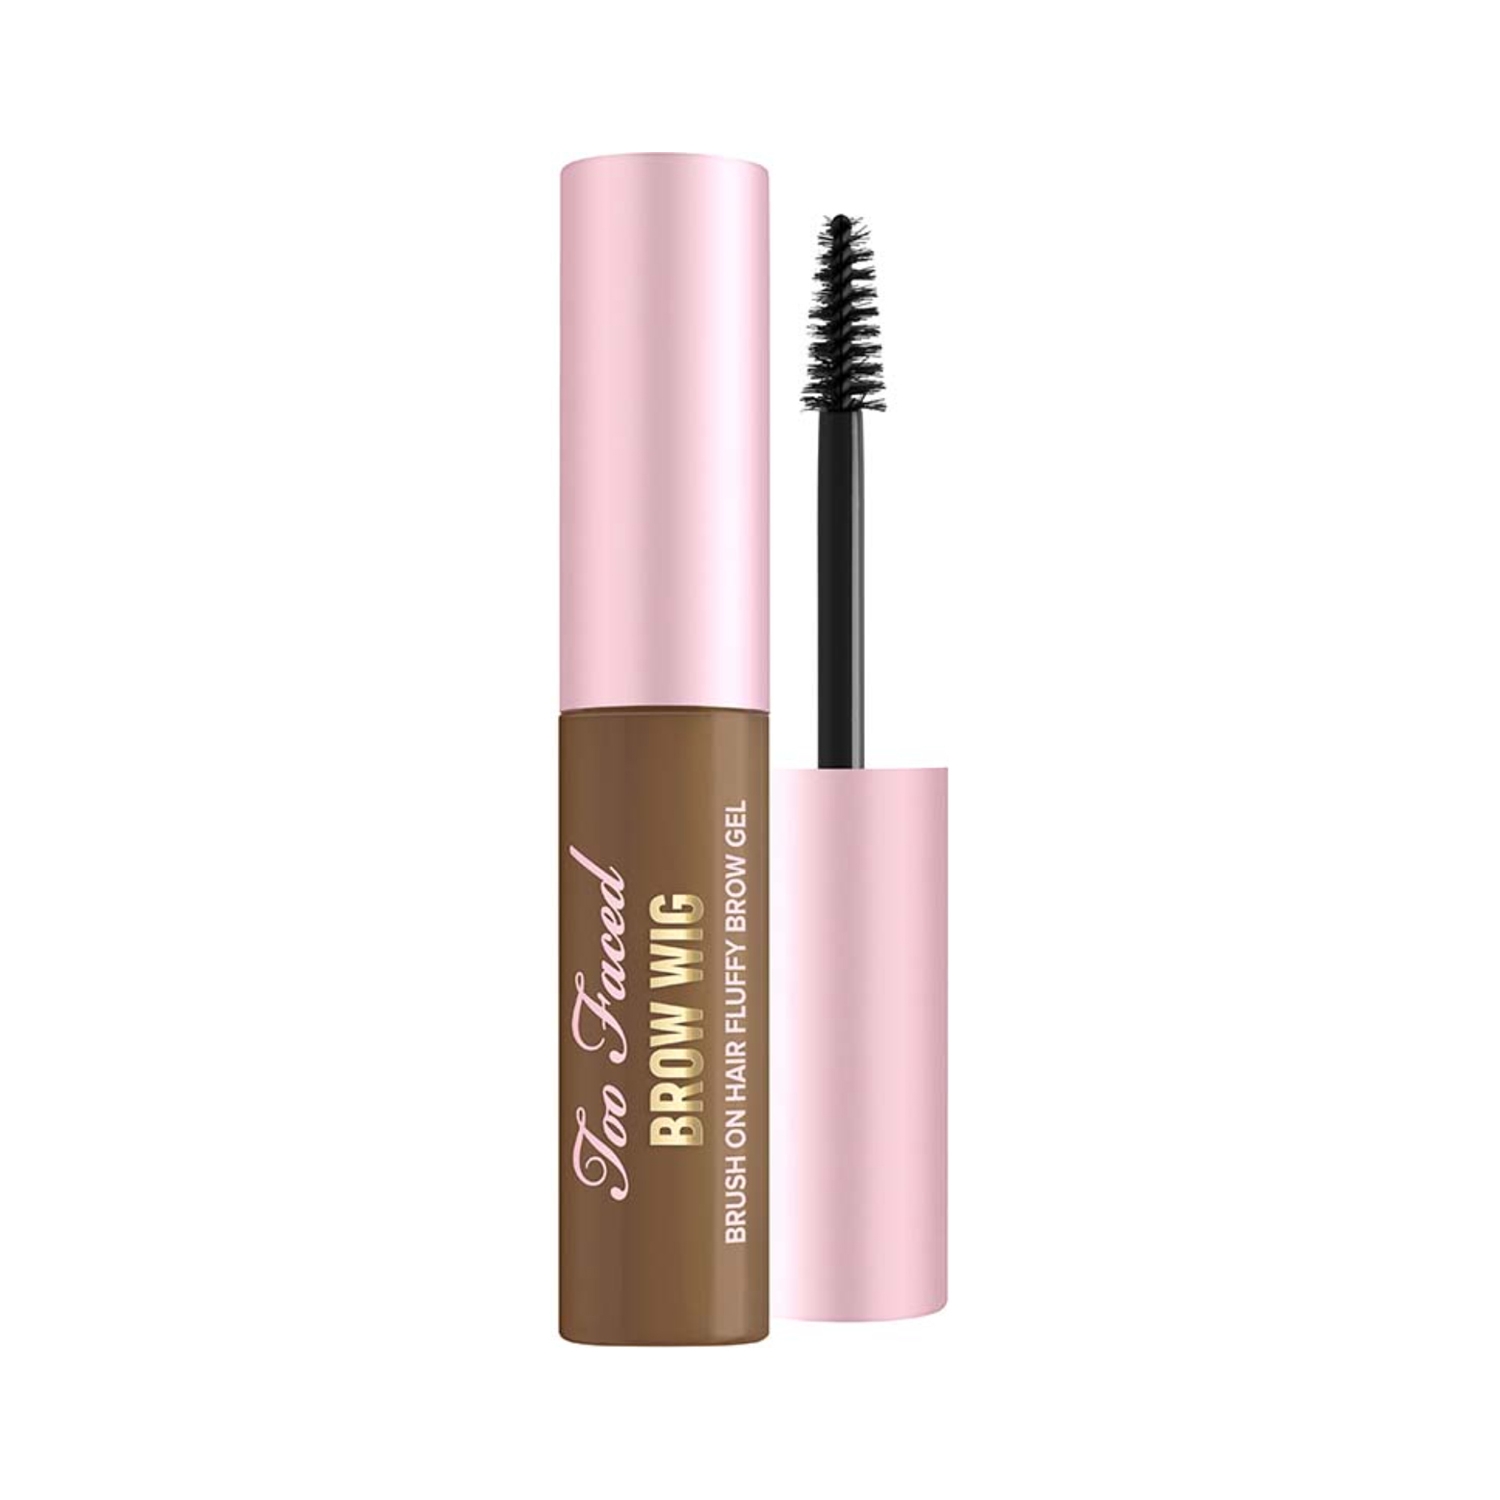 Too Faced | Too Faced Brow Wig Eyebrow Gel - Taupe (5.5ml)